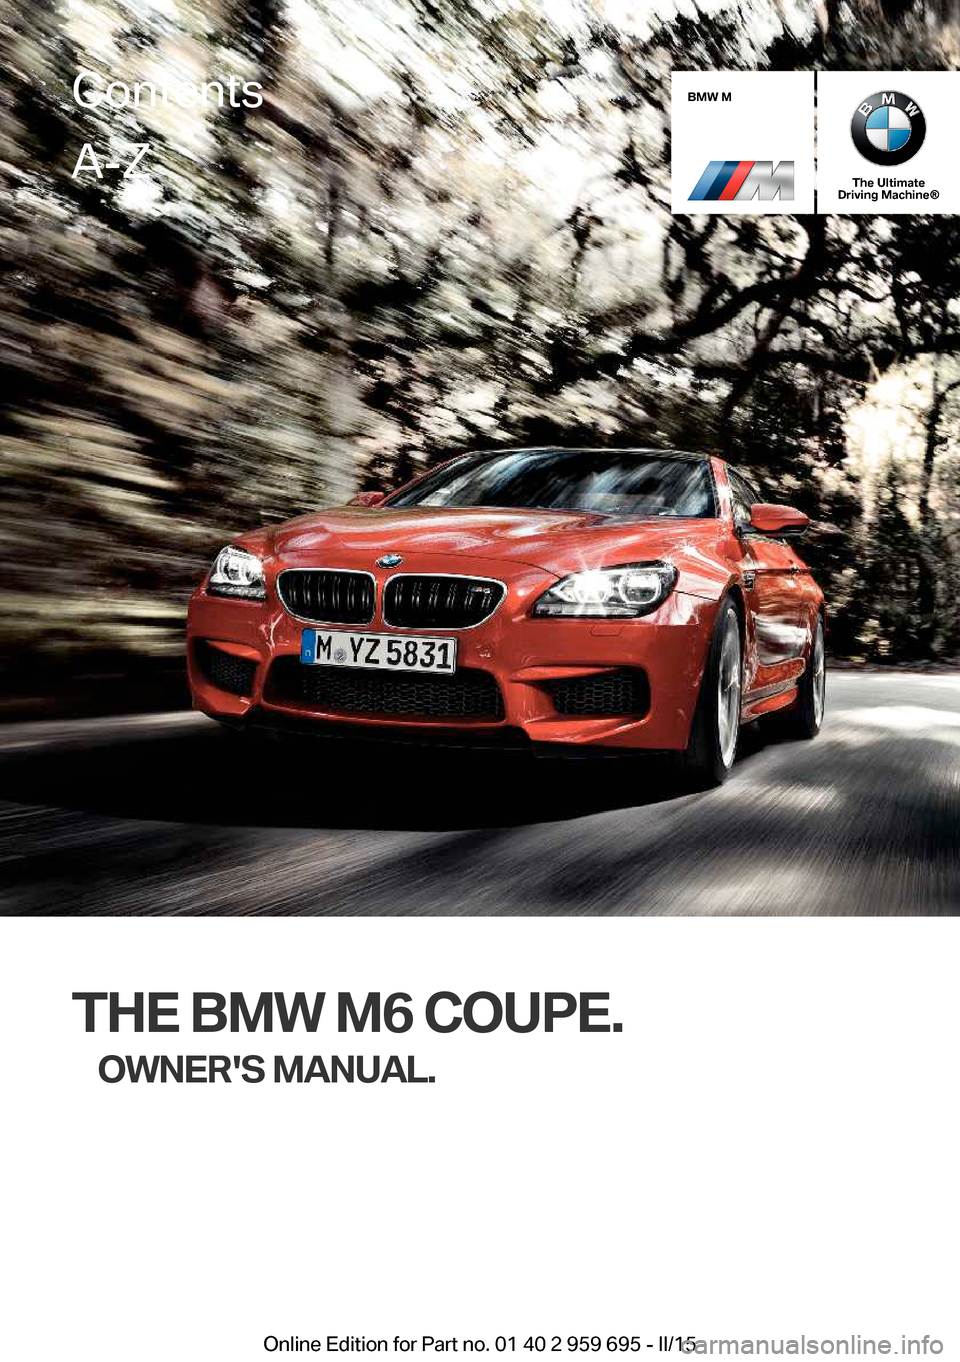 BMW M6 COUPE 2015 F13M Owners Manual BMW M
The Ultimate
Driving Machine®
THE BMW M6 COUPE.
OWNERS MANUAL.
ContentsA-Z
Online Edition for Part no. 01 40 2 959 695 - II/15   